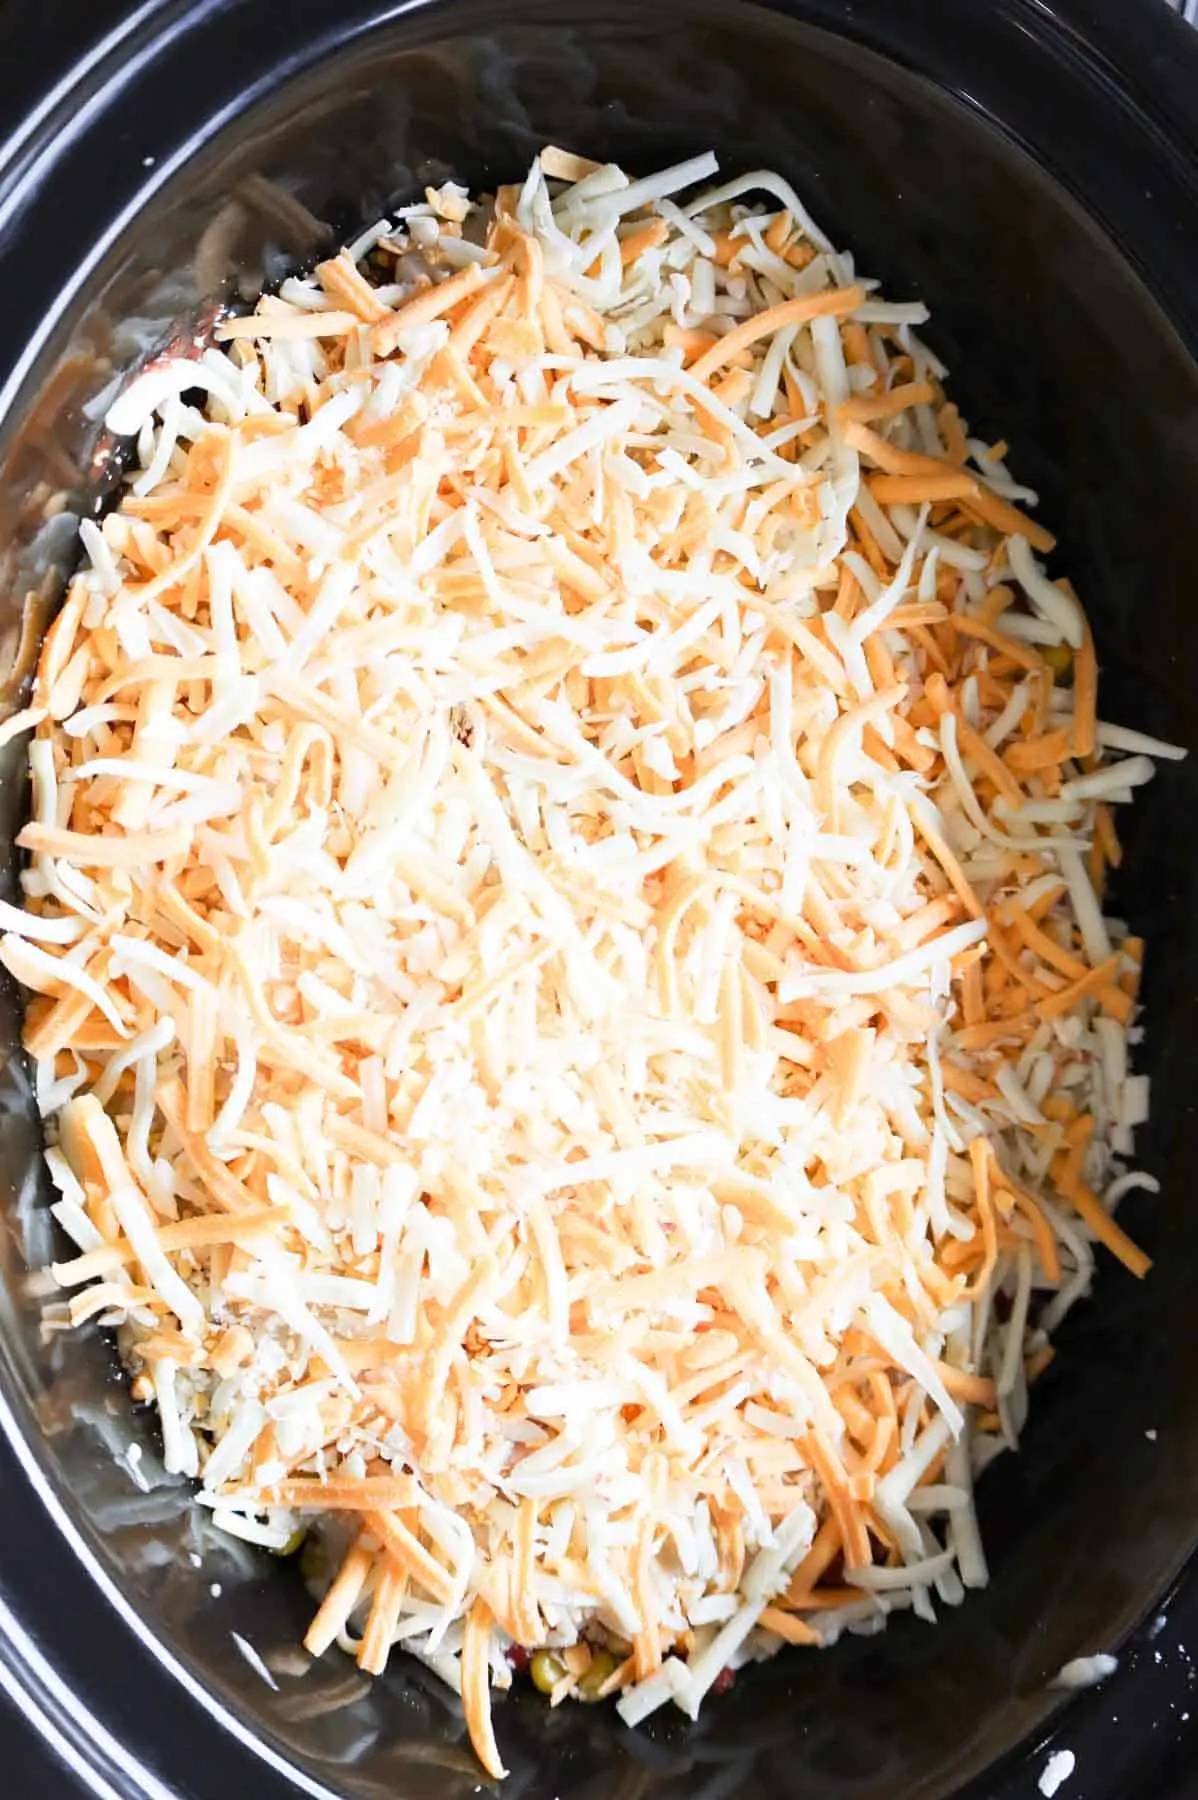 shredded cheddar cheese on top of tater tot casserole in a crock pot